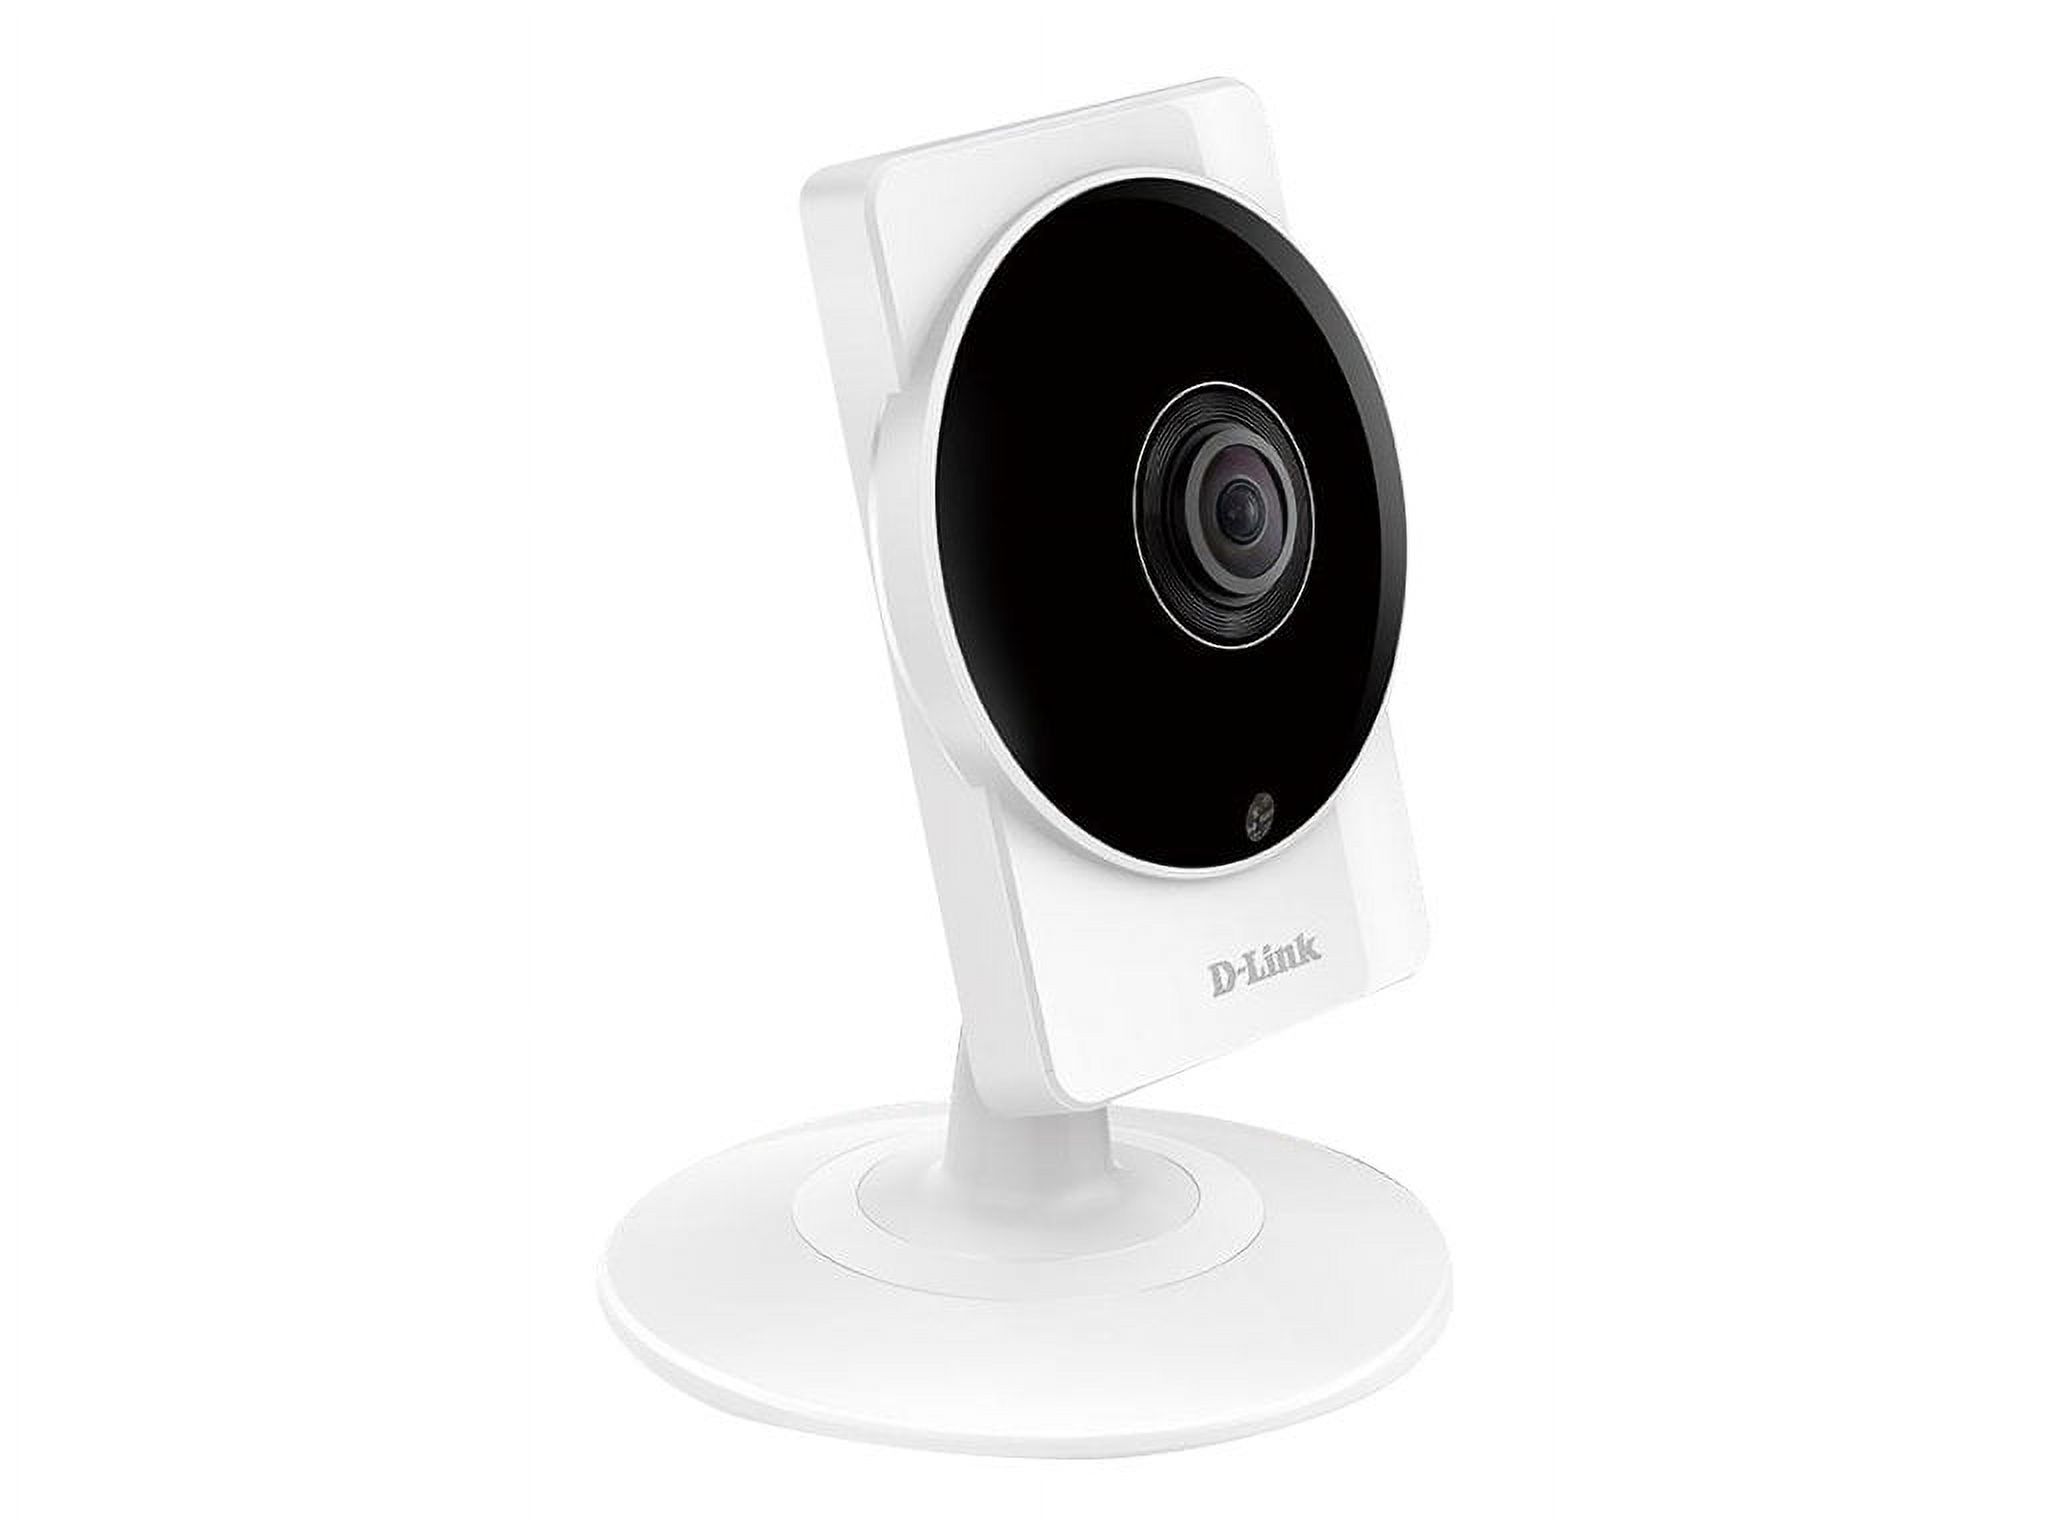 mydlink Home Panoramic HD Camera - Network surveillance camera - color (Day&Night) - 1280 x 720 - fixed focal - audio - Wi-Fi - MJPEG, H.264 - DC 5 V - image 2 of 7